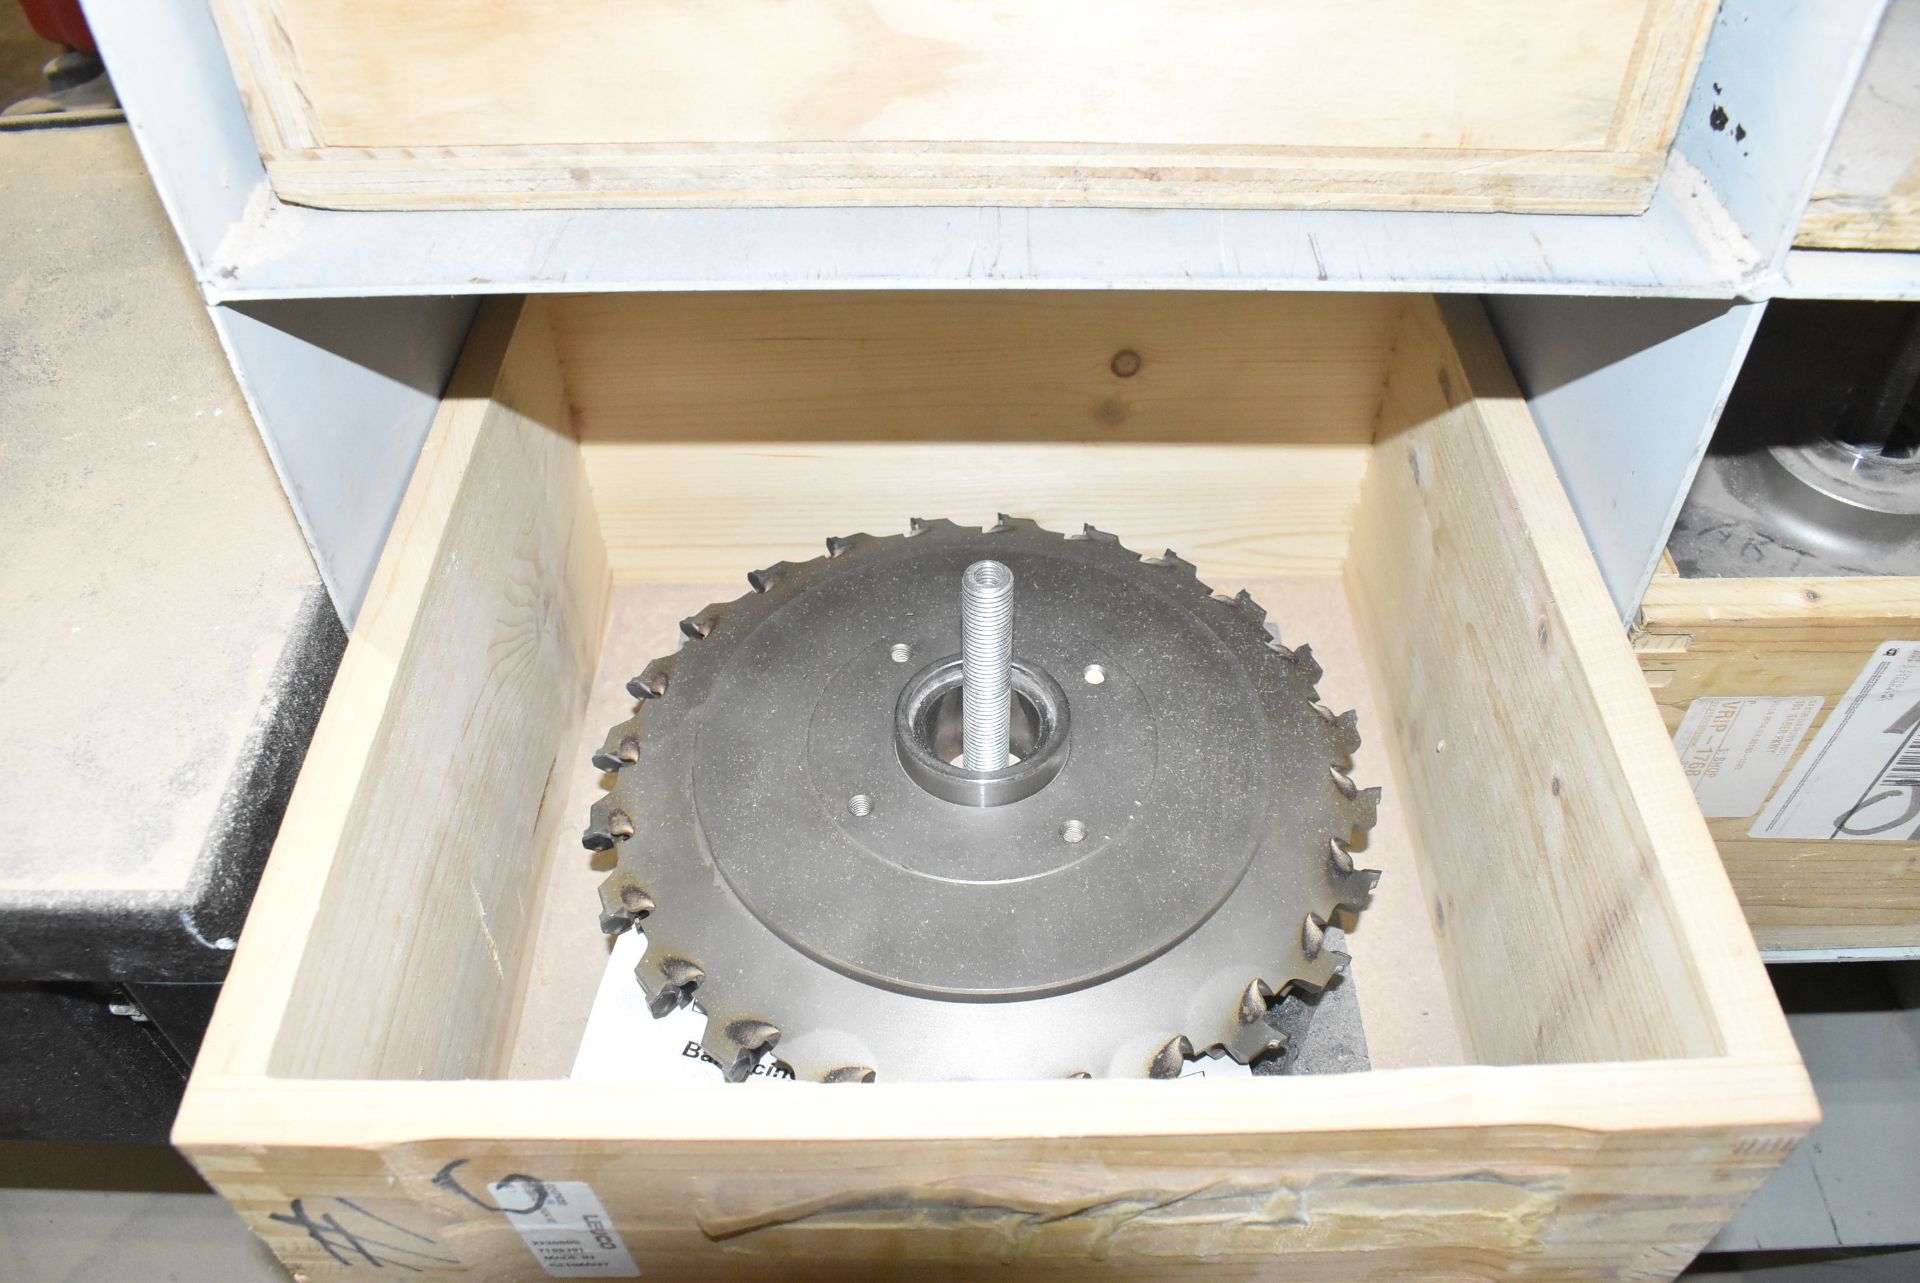 LOT/ HOMAG DOUBLE END TENONER TOOLING [RIGGING FEE FOR LOT #182 - $300 USD PLUS APPLICABLE FEES] - Image 6 of 14